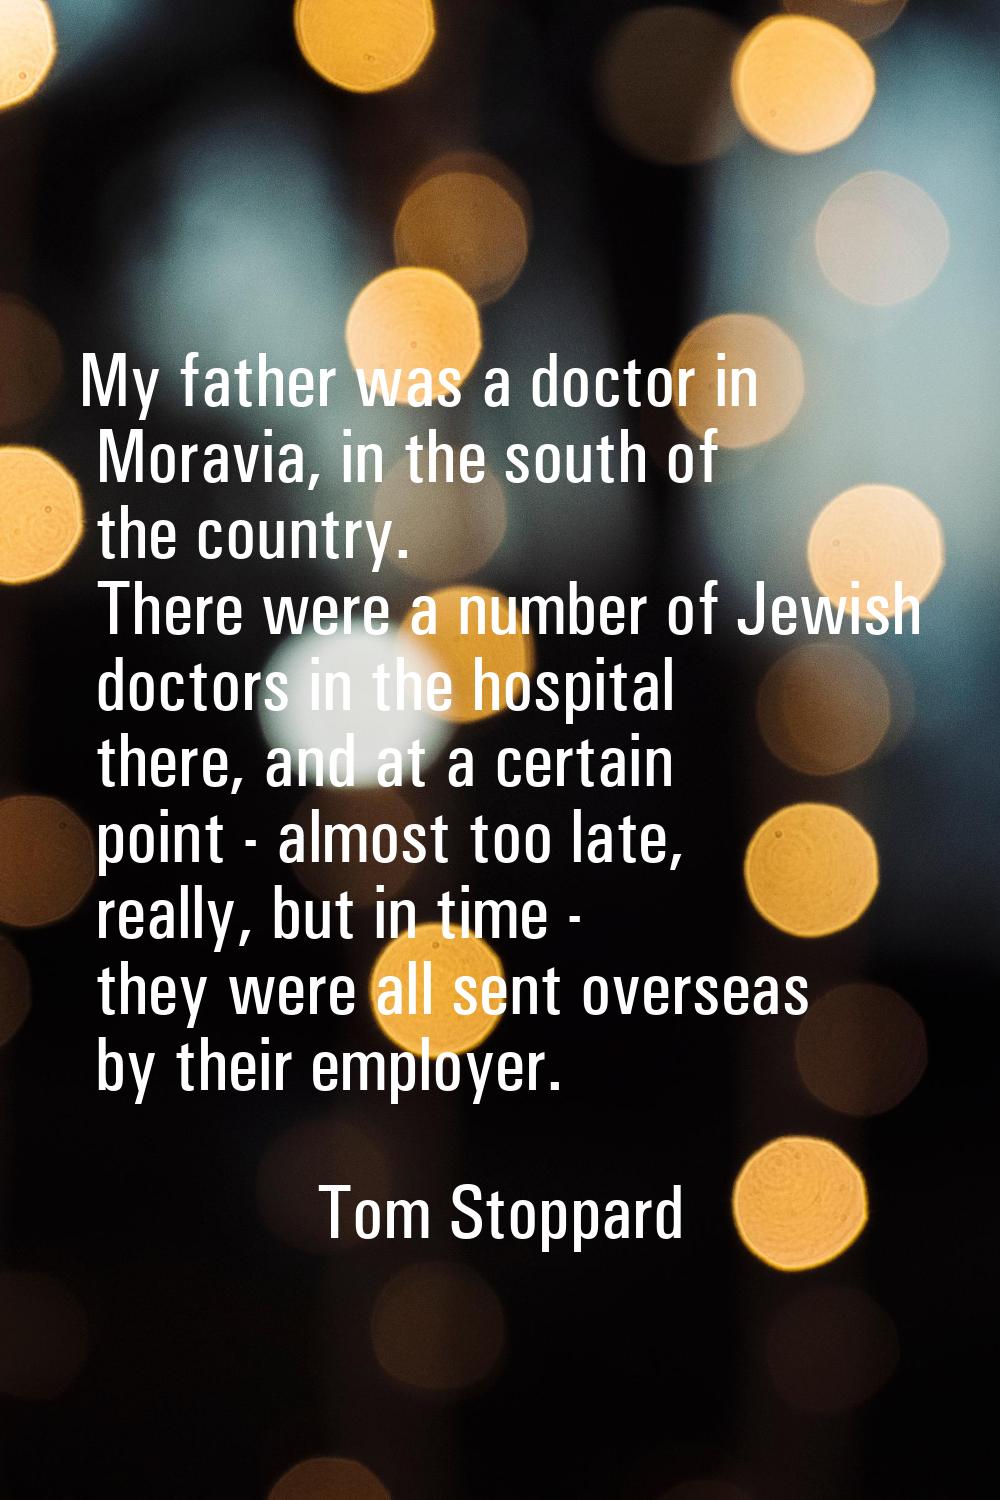 My father was a doctor in Moravia, in the south of the country. There were a number of Jewish docto